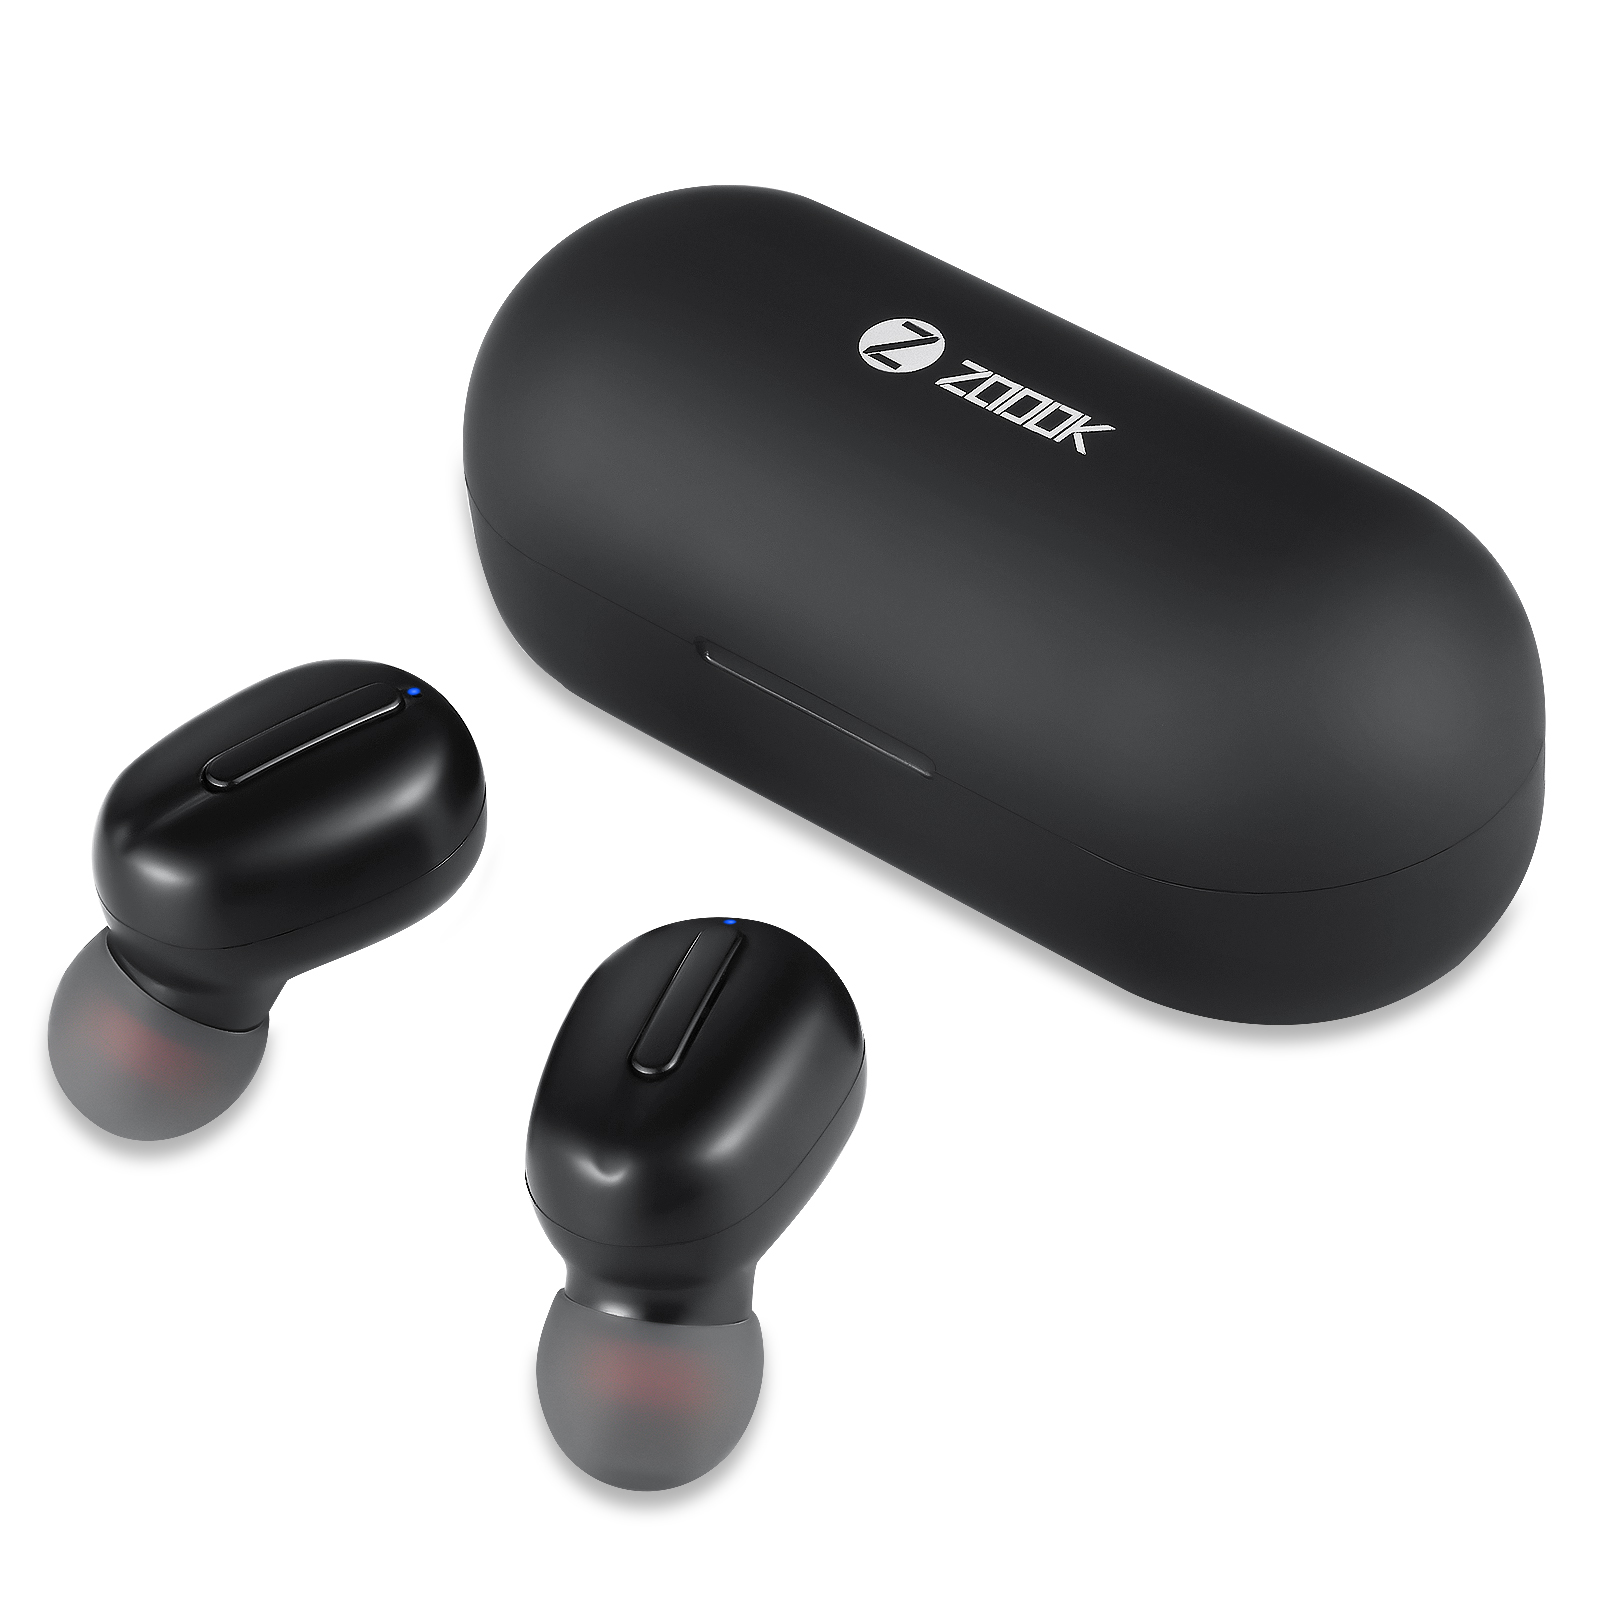 ZOOOK launches True Wireless Ear buds Rocker Couplet, an all-time companion decoding=